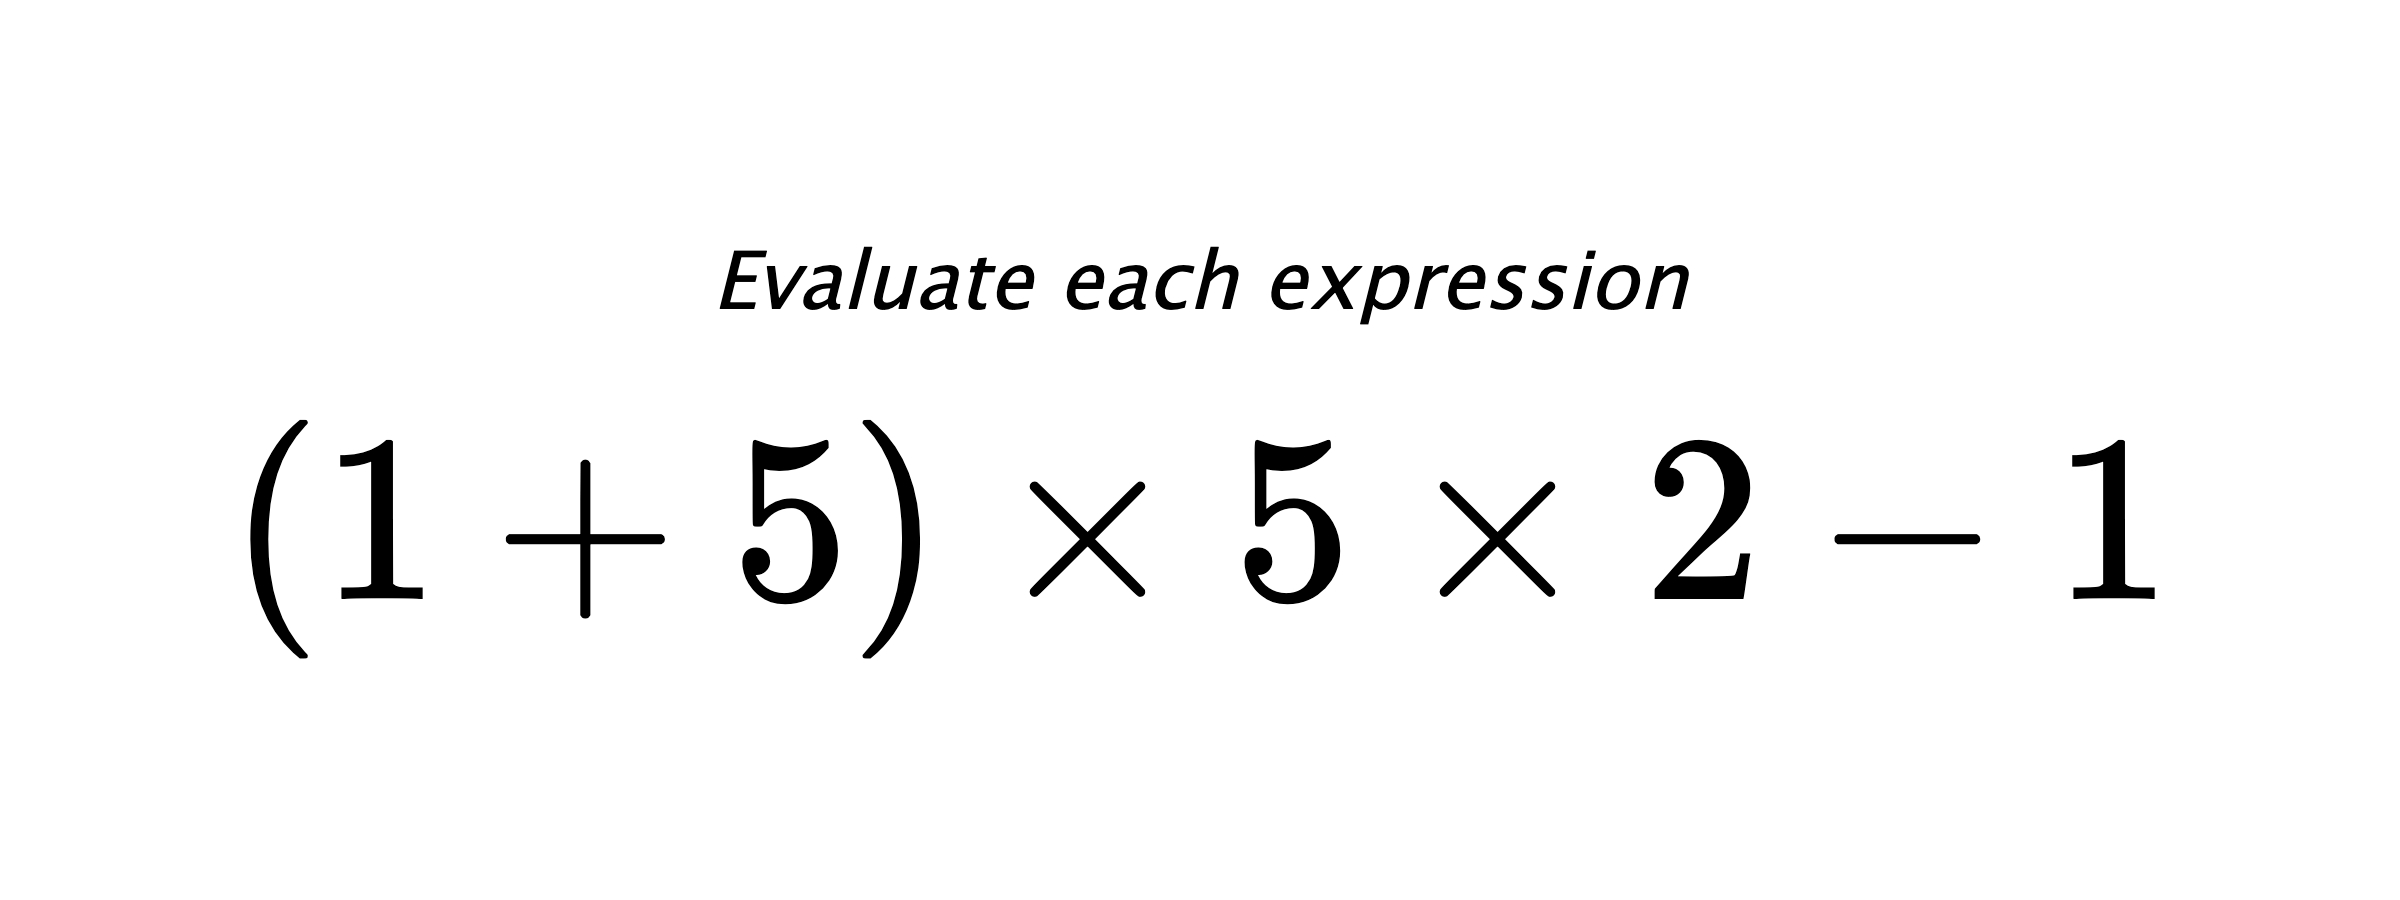 Evaluate each expression $ (1+5) \times 5 \times 2 - 1 $